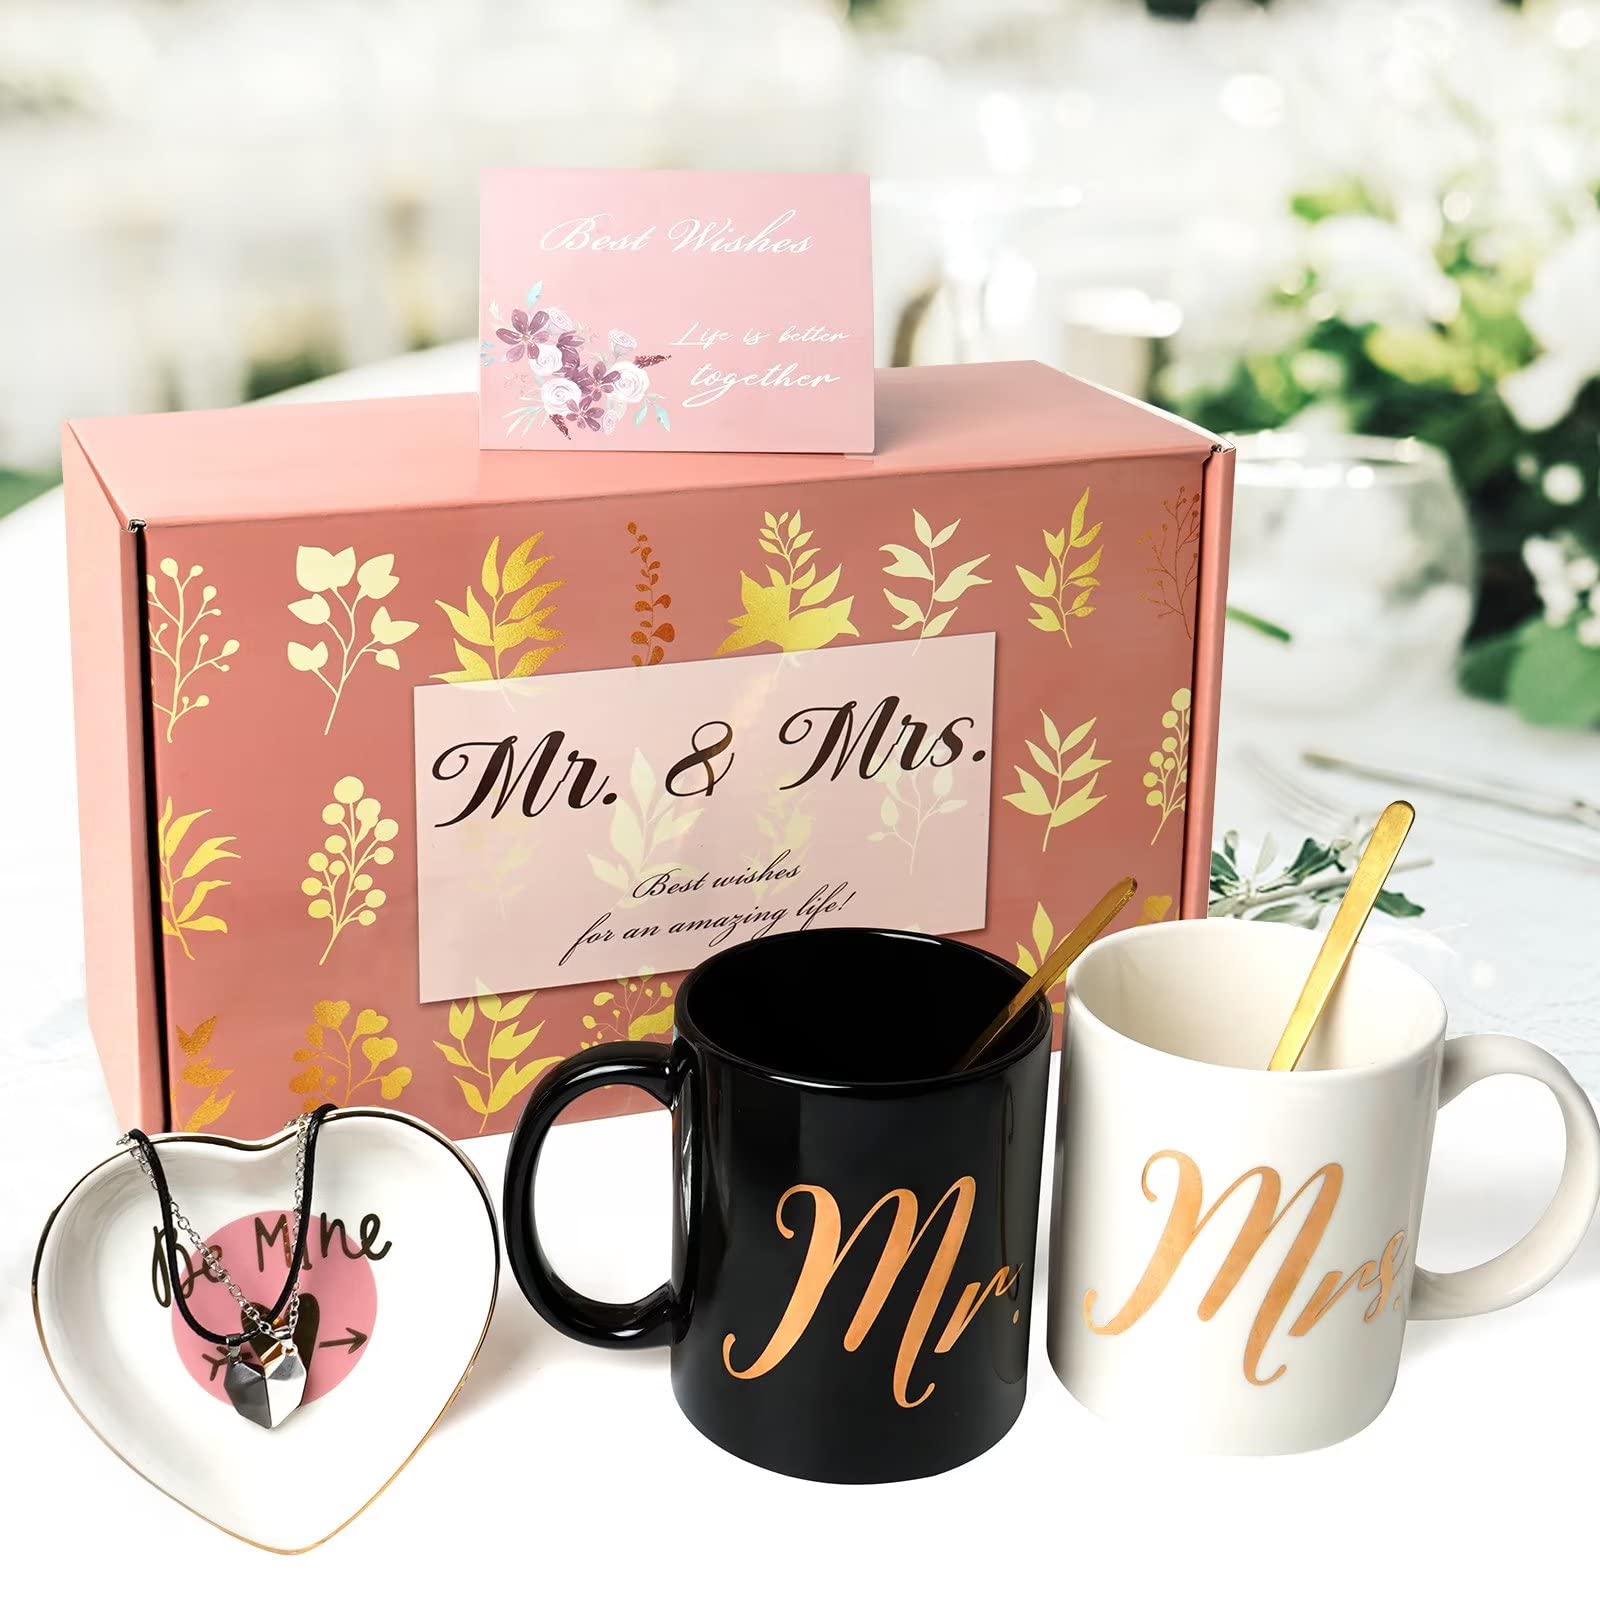 Vakuny Wedding Gifts for Couples - Bridal Shower Gift for Her Women - Anniversary Engagement Honeymoon Gifts for Newlyweds - Mr & Mrs Gifts for Bride and Groom